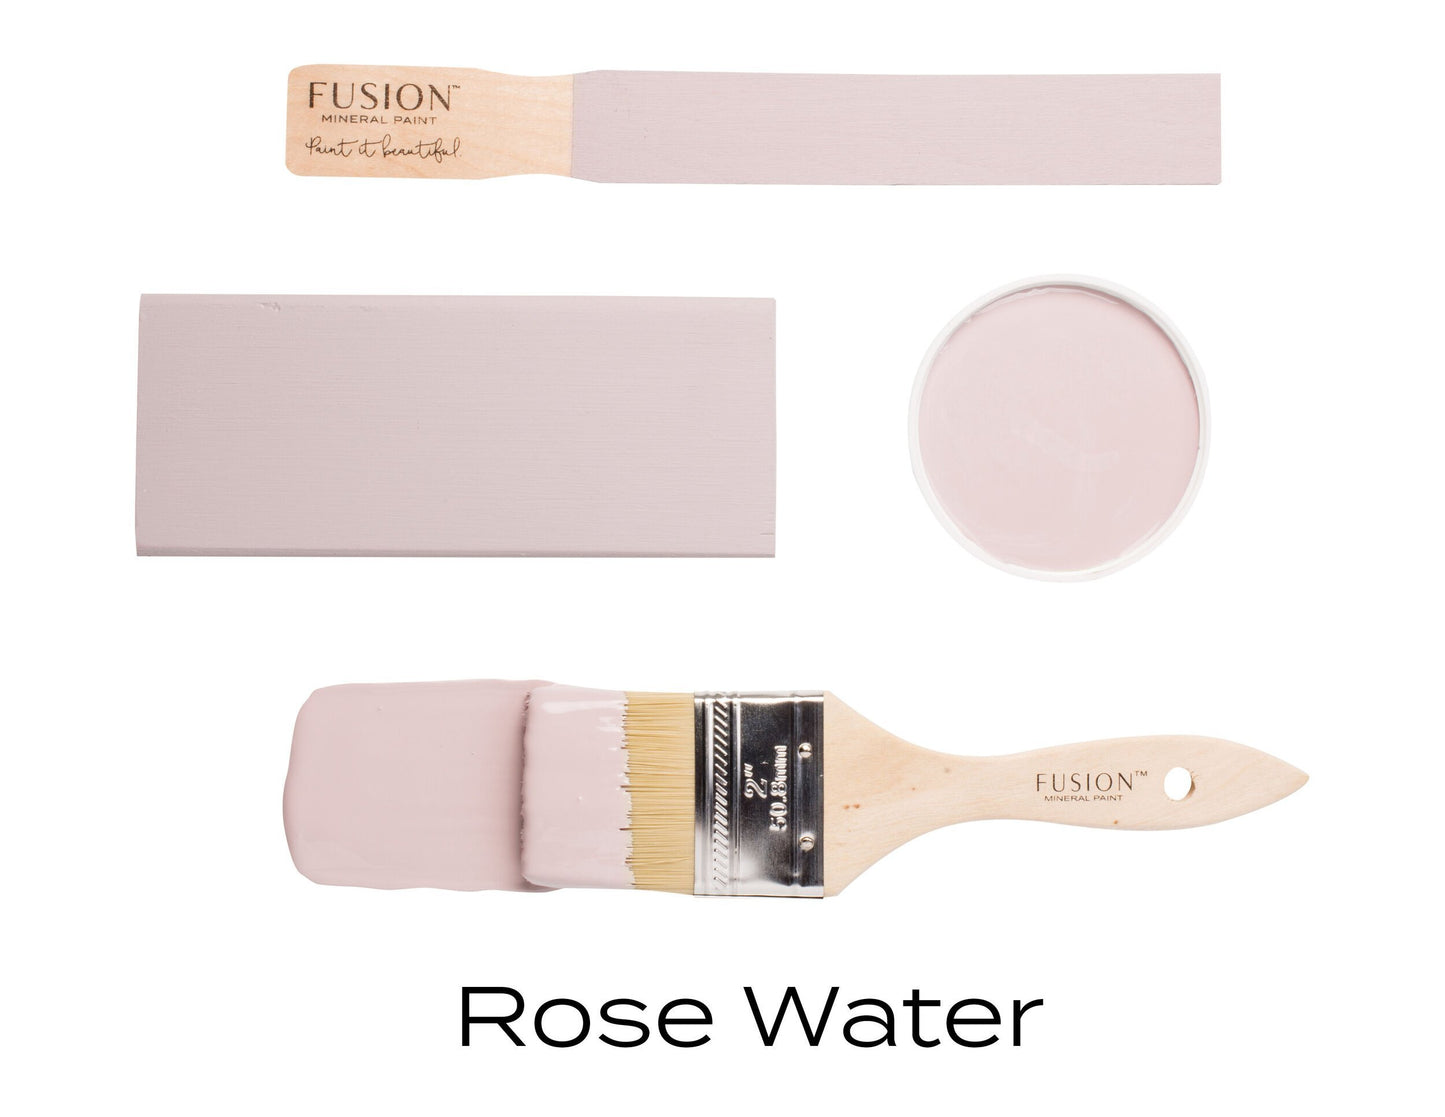 A neutral pink inspired by the droplets from steeped rose petals. Delicate and modern, this shade is stylish in any space.